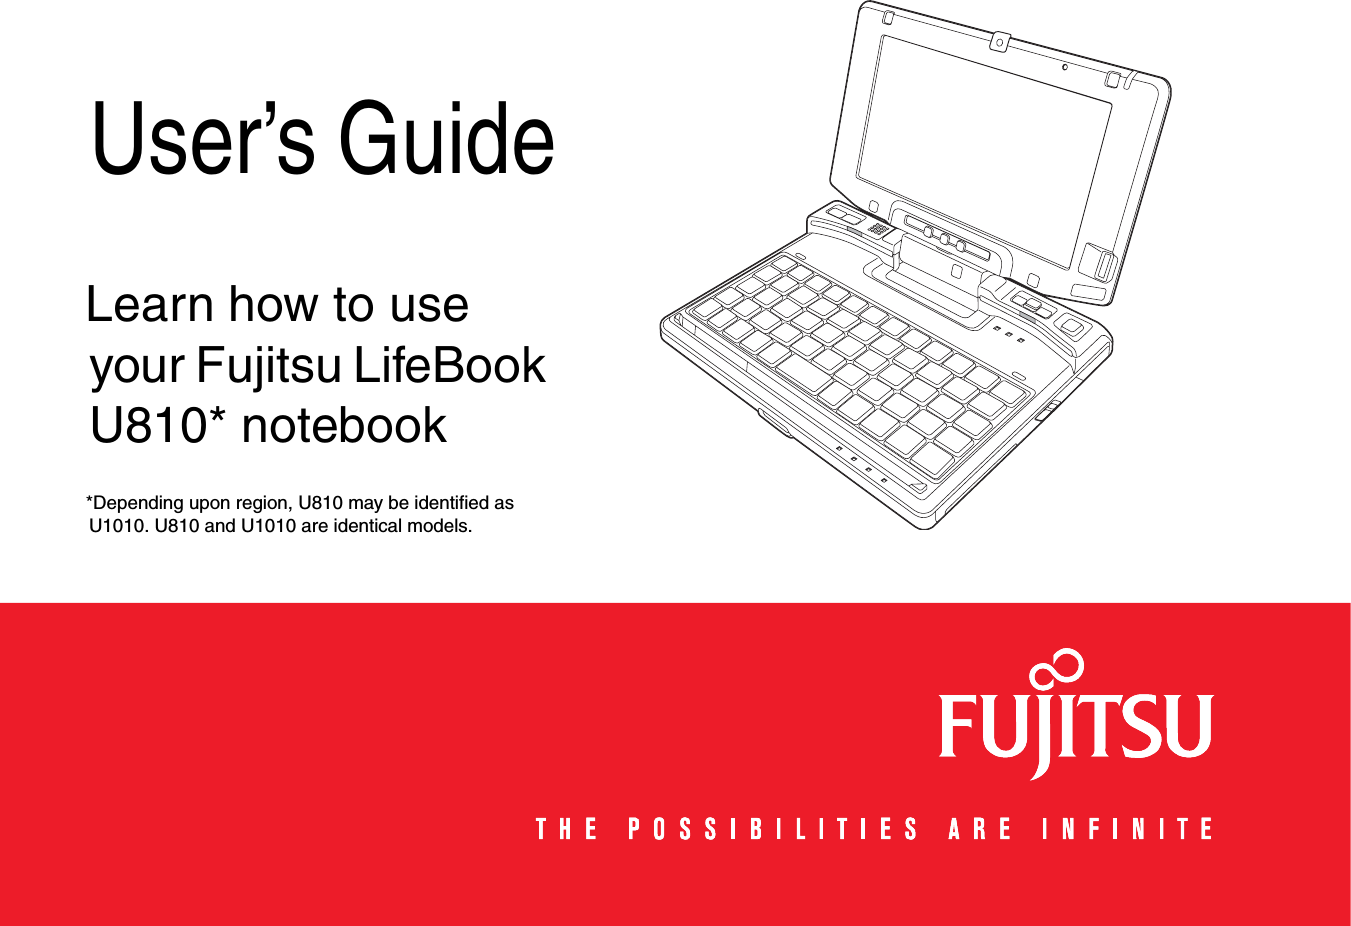   User’s GuideLearn how to use your Fujitsu LifeBook U810* notebook*Depending upon region, U810 may be identified as U1010. U810 and U1010 are identical models.